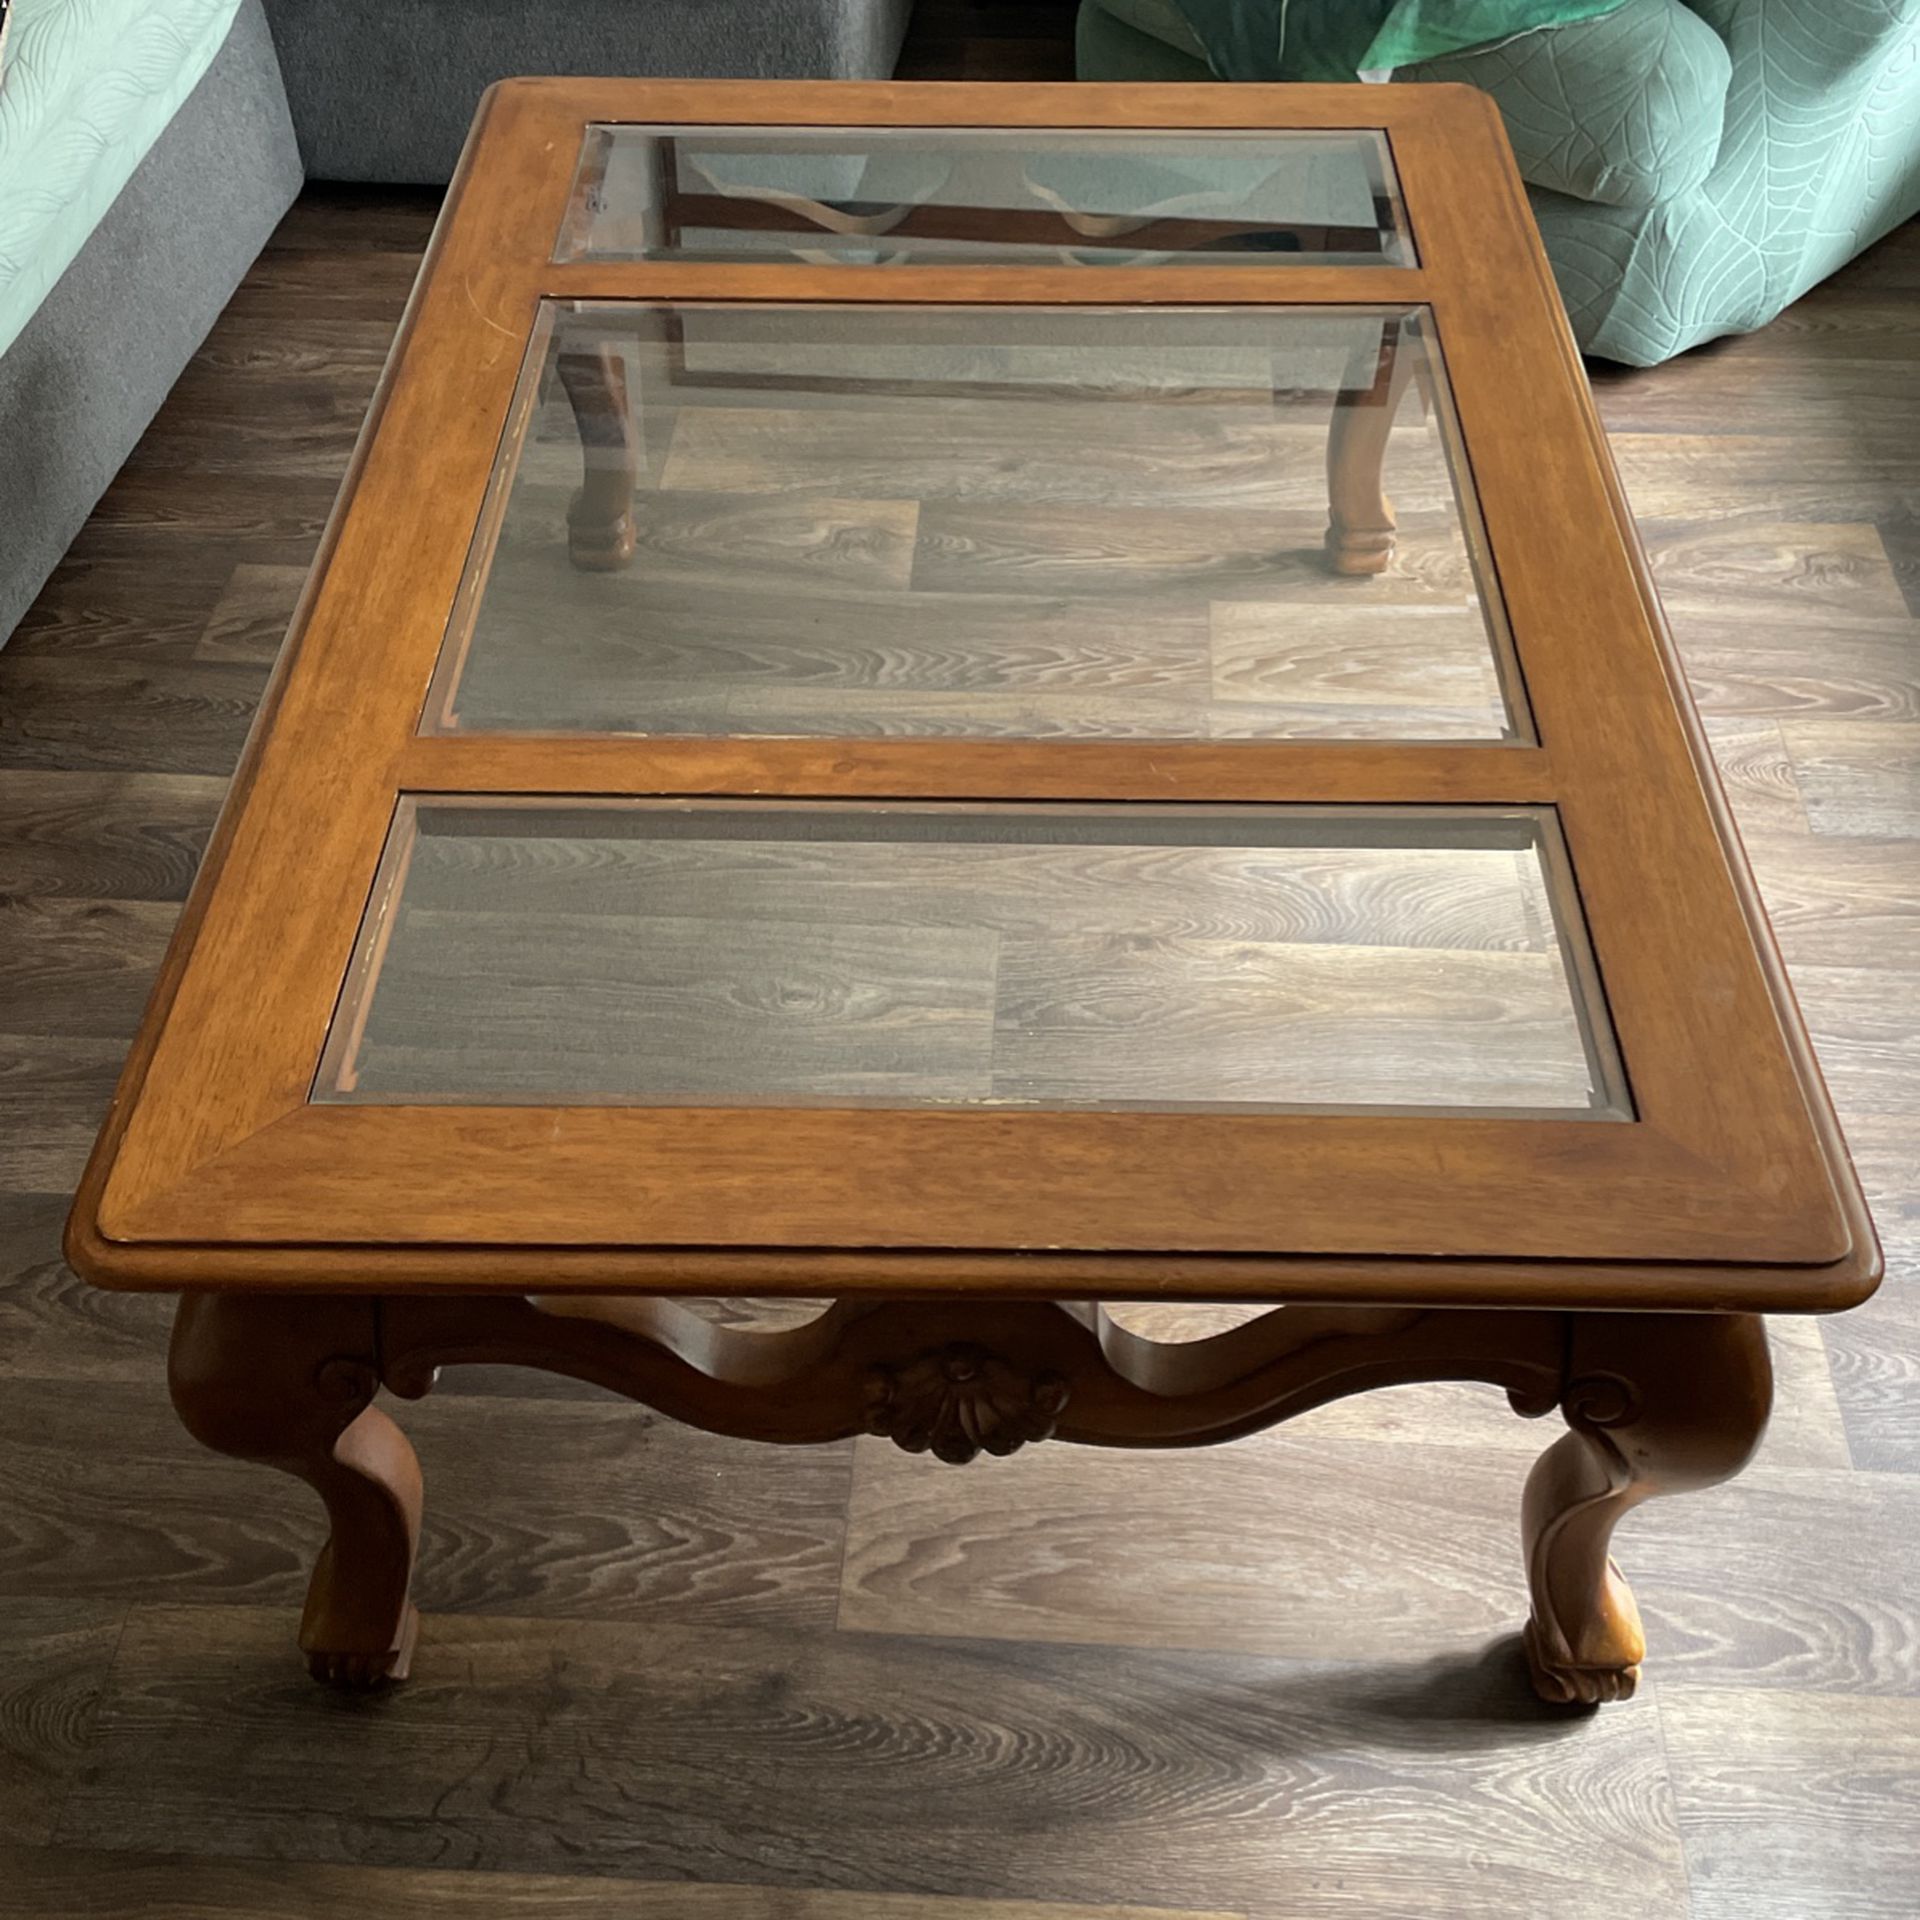 Large coffee table